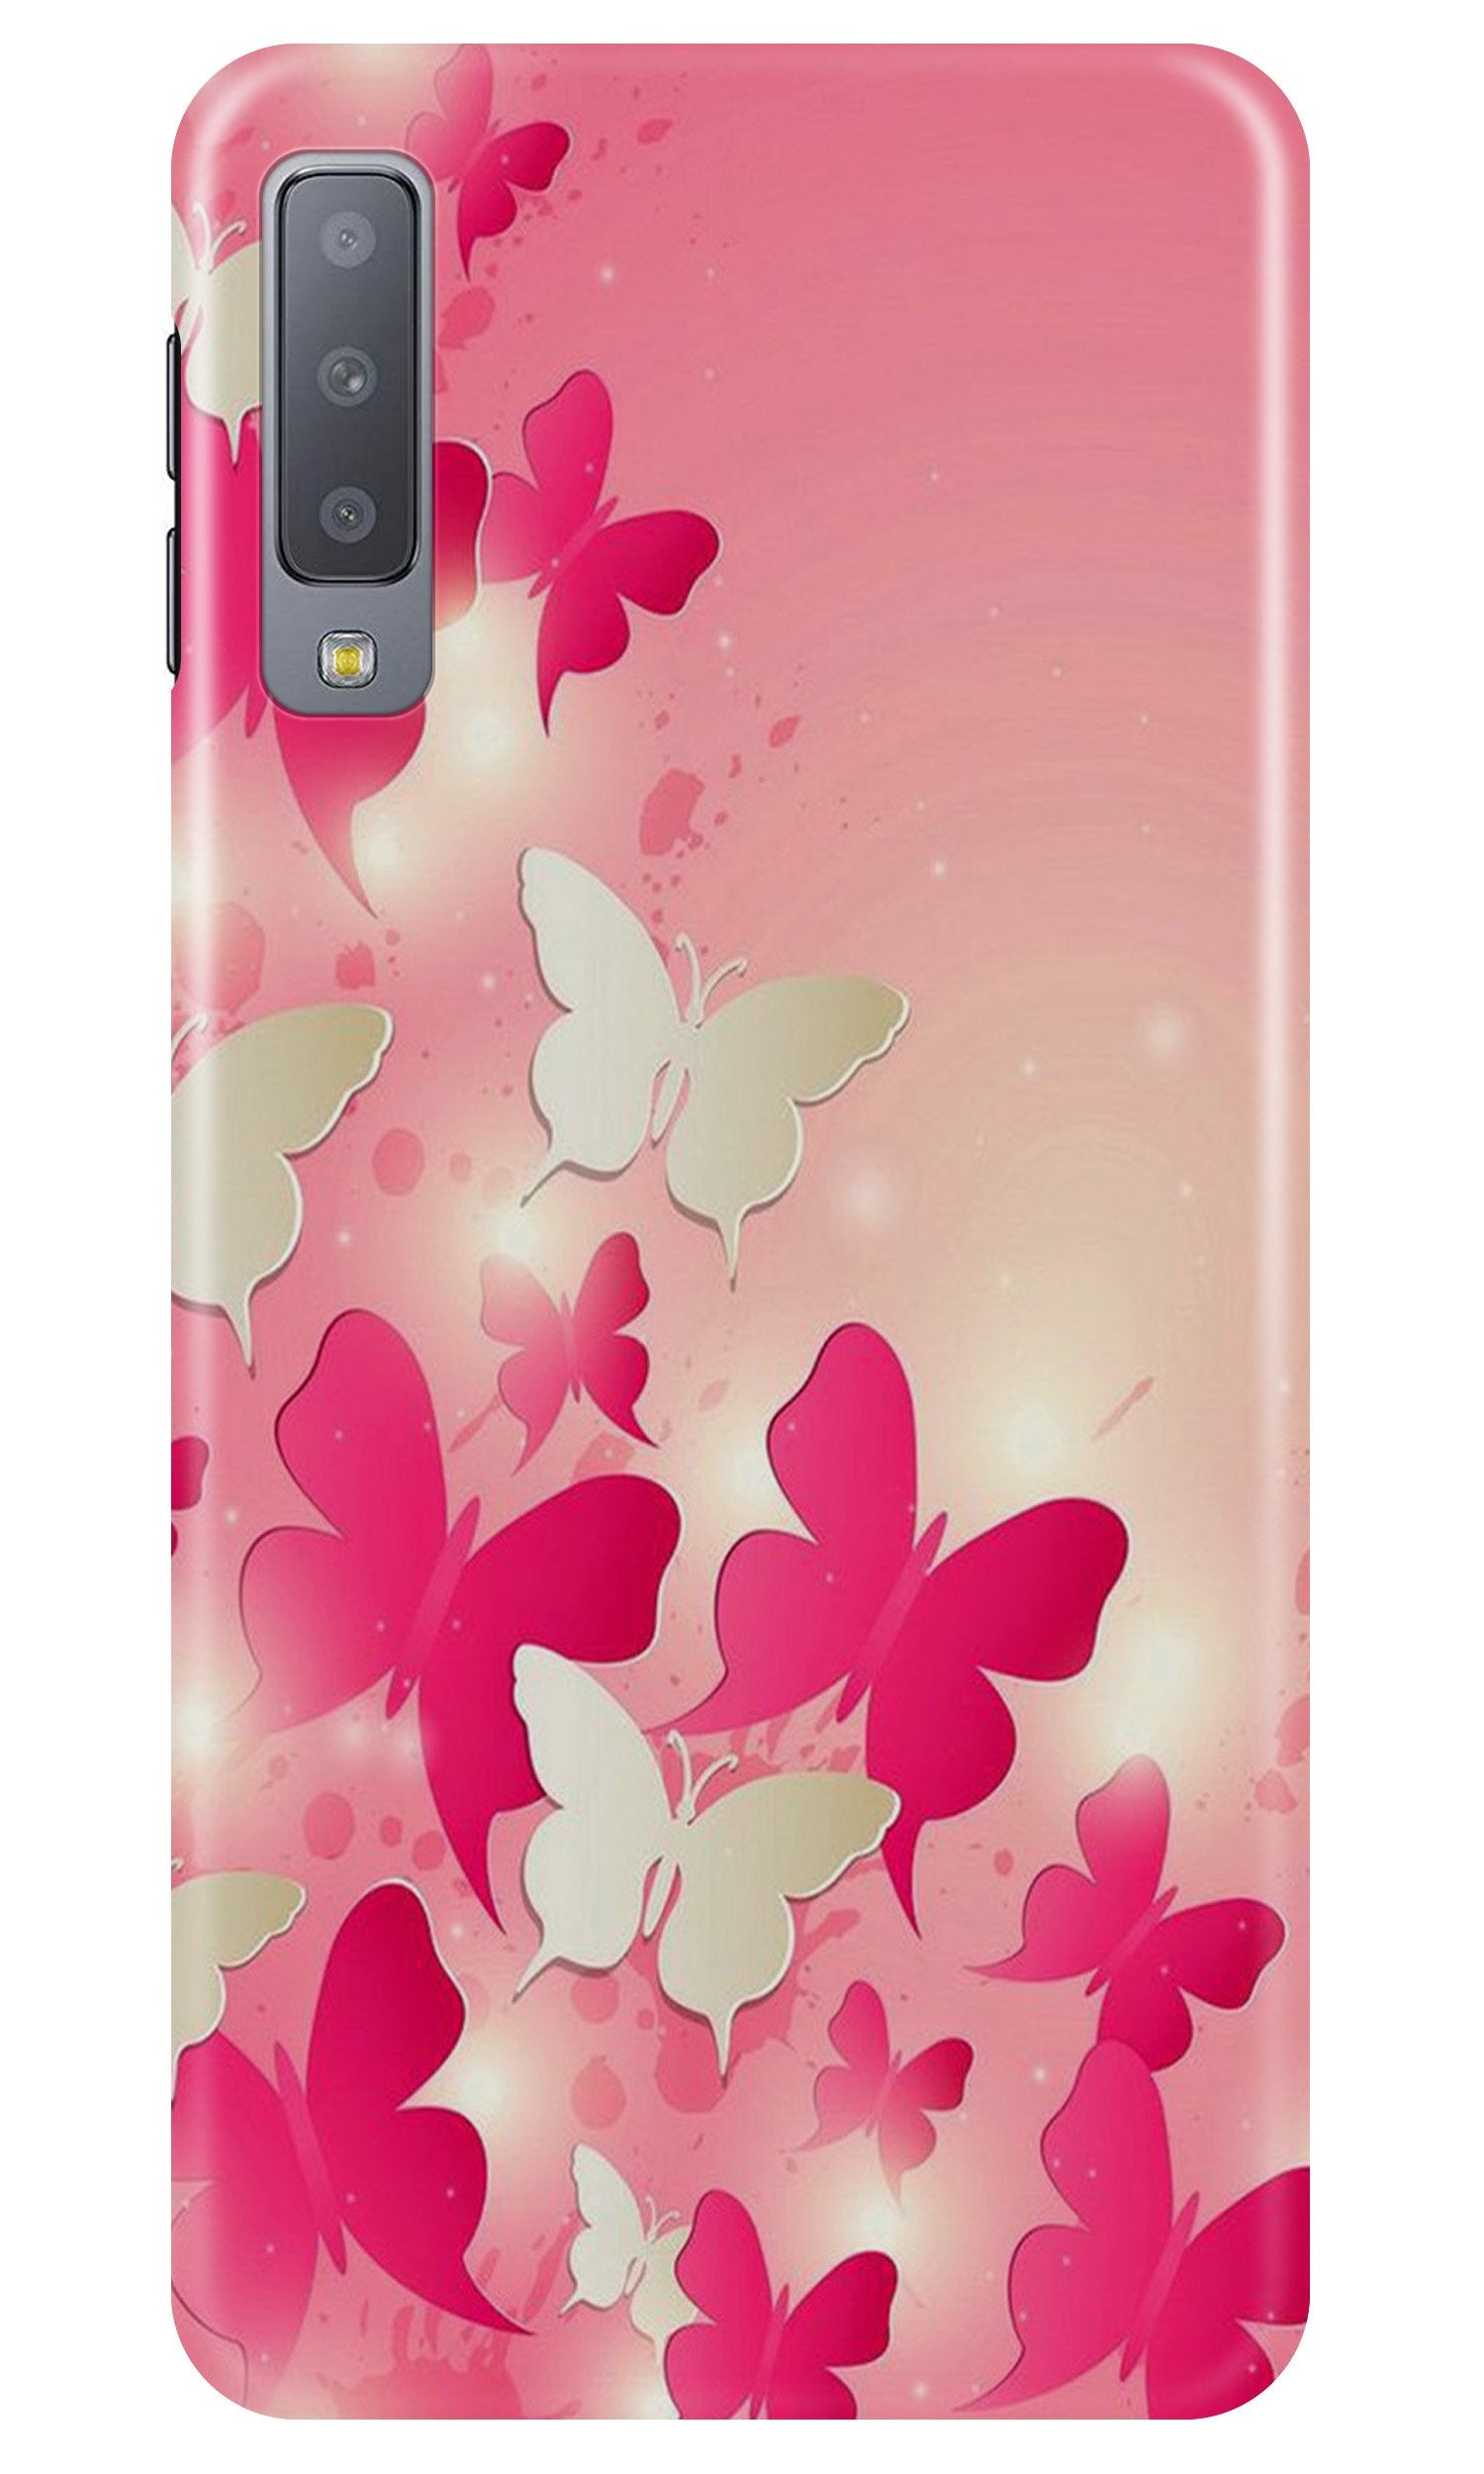 White Pick Butterflies Case for Samsung Galaxy A30s